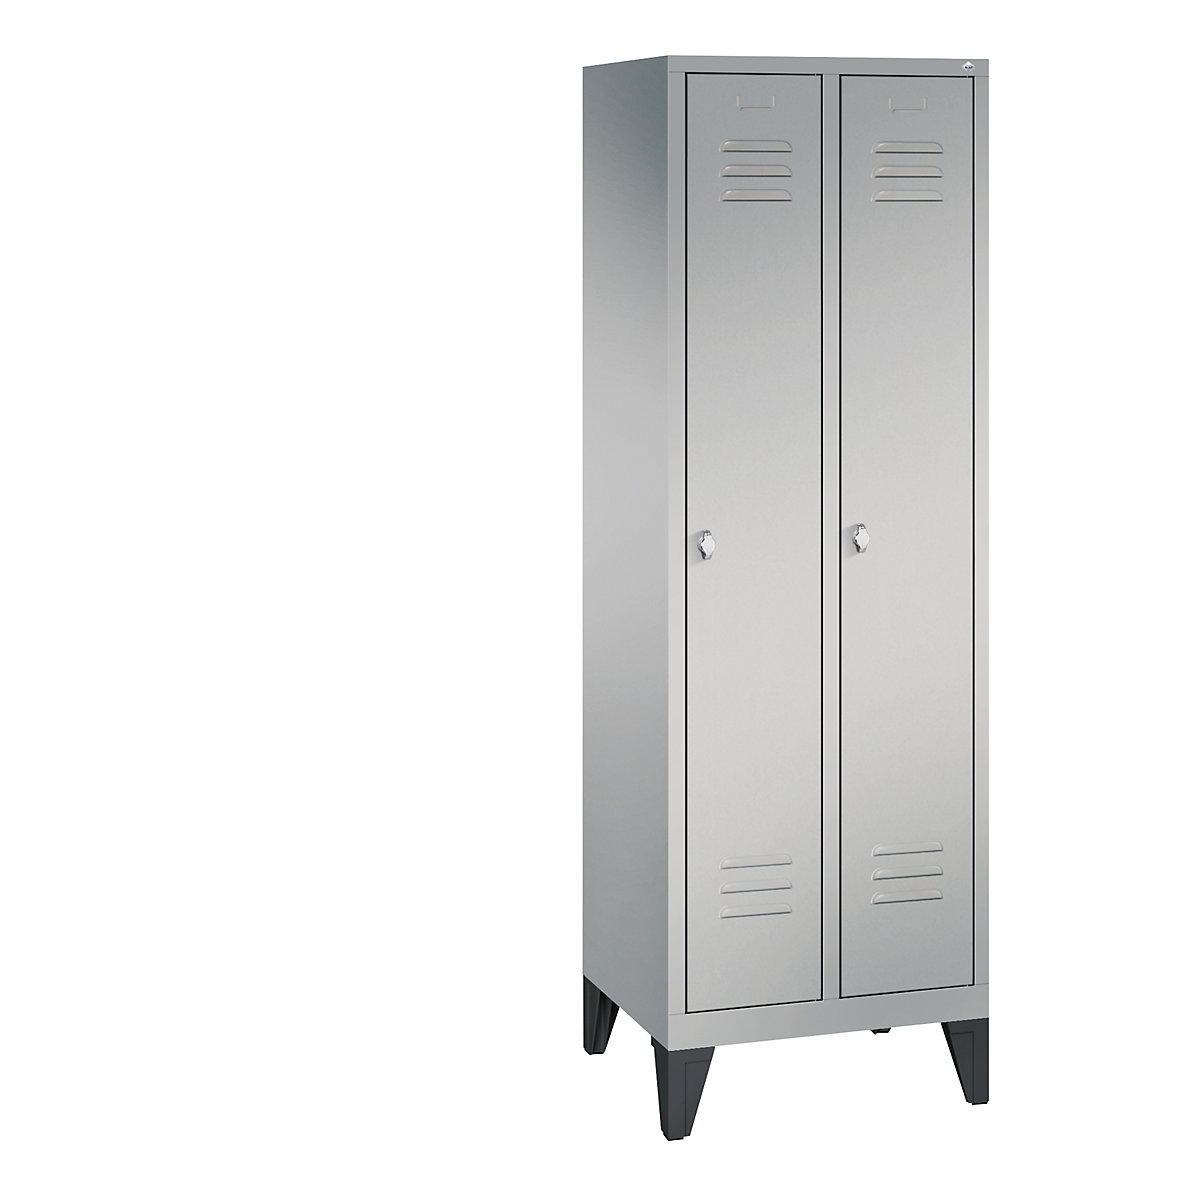 CLASSIC cloakroom locker with feet – C+P, 2 compartments, compartment width 300 mm, white aluminium-14